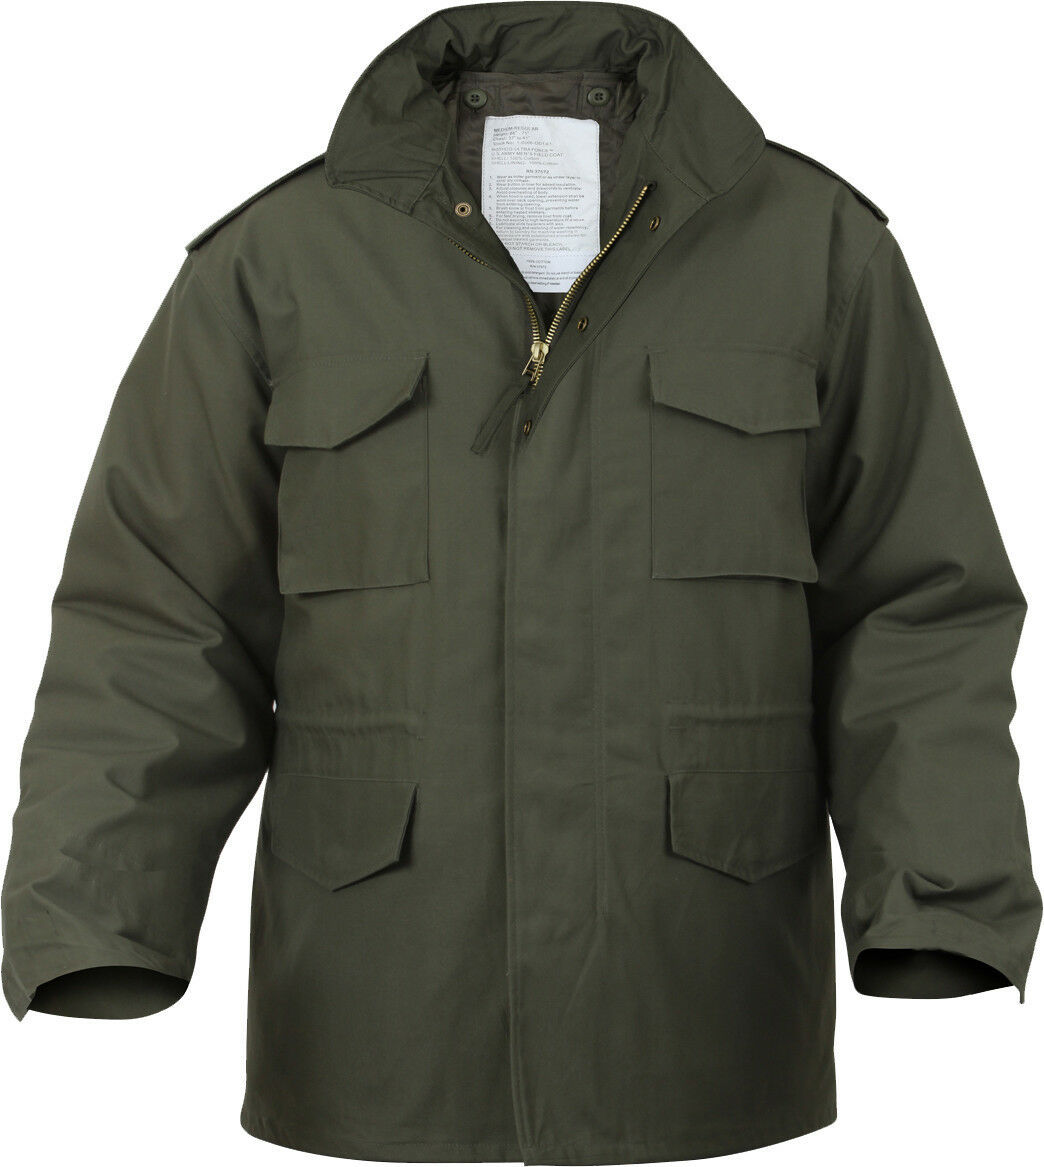 Olive Drab Military M-65 Field Coat Army M65 Jacket with Liner - Coats